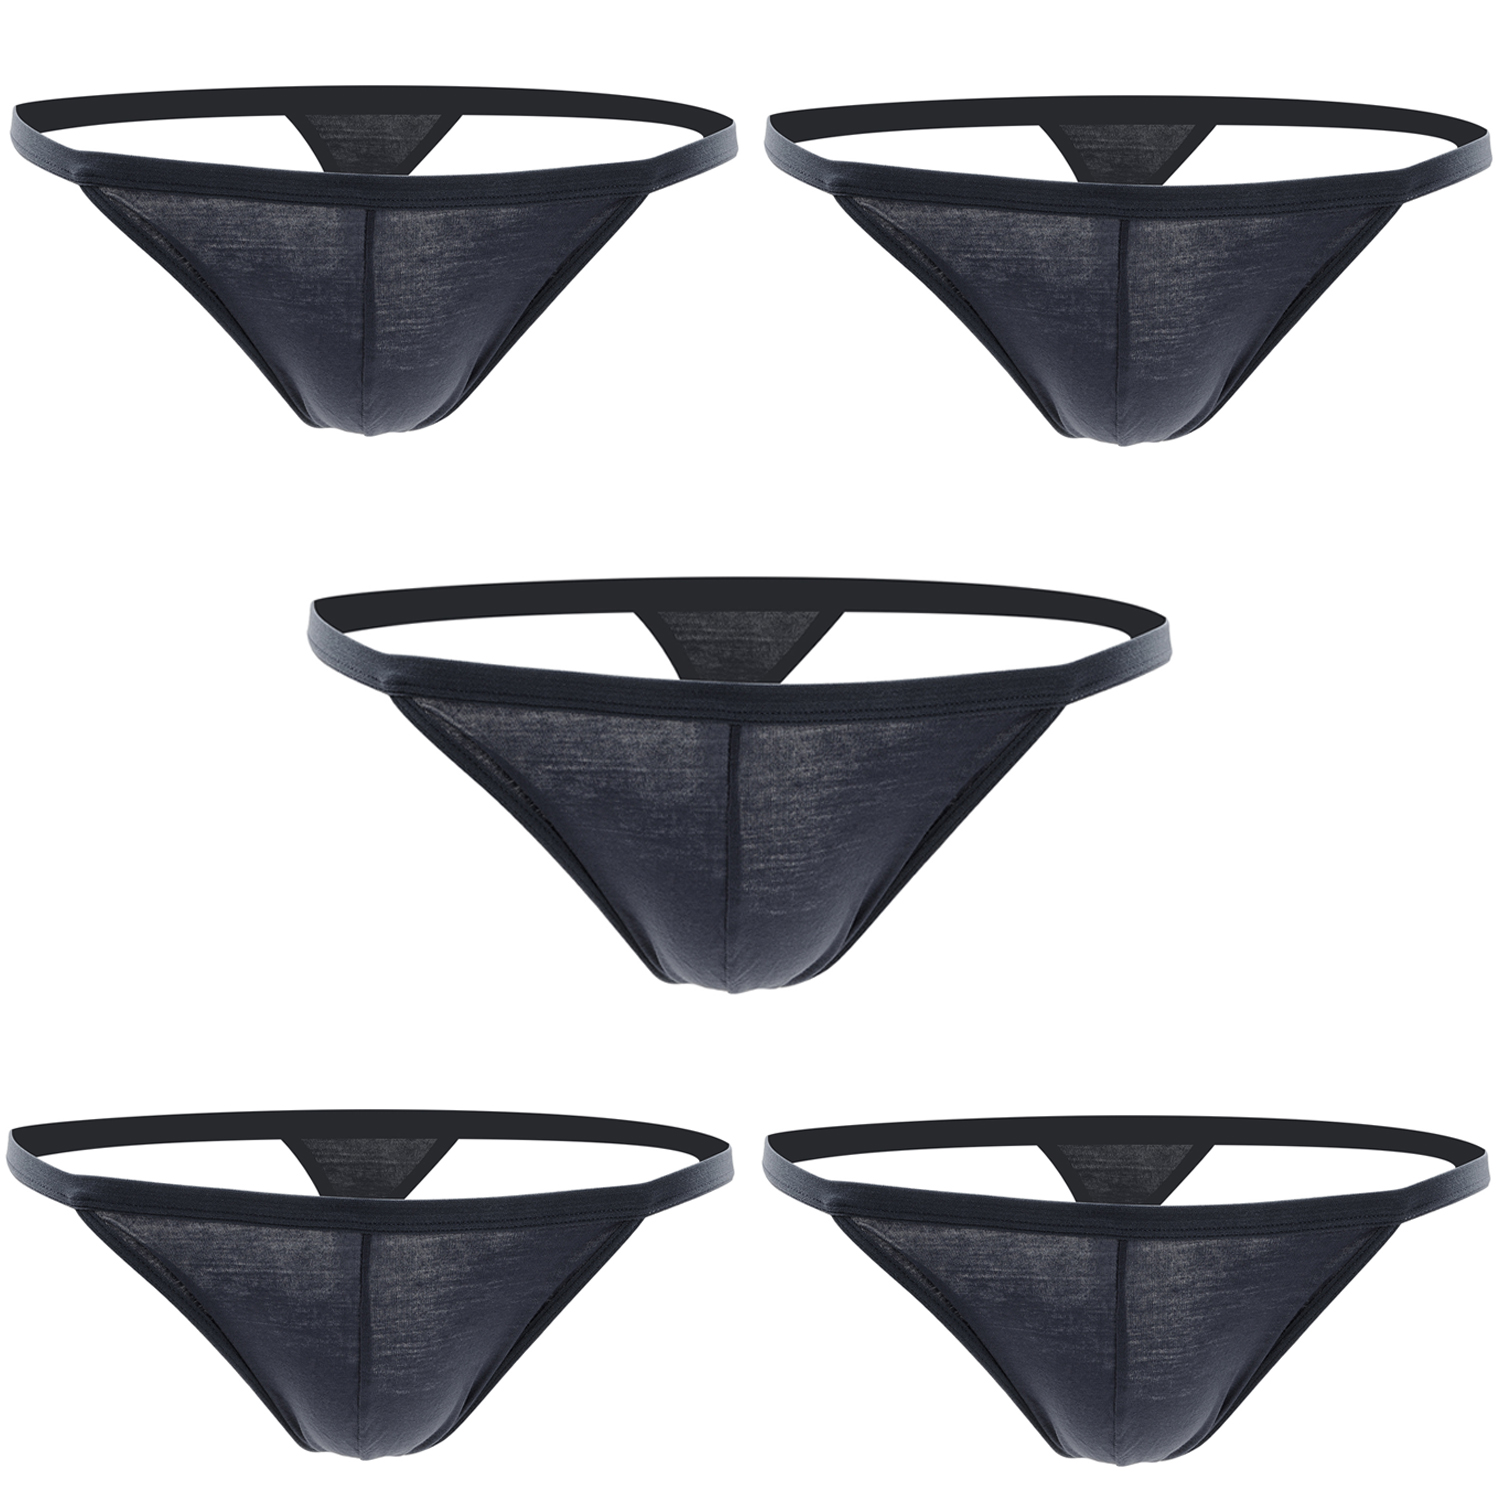 Closecret Cotton G-String, Women Panties Simple Thongs Lightweight  G-String& T-Back(2 Styles) : : Clothing, Shoes & Accessories